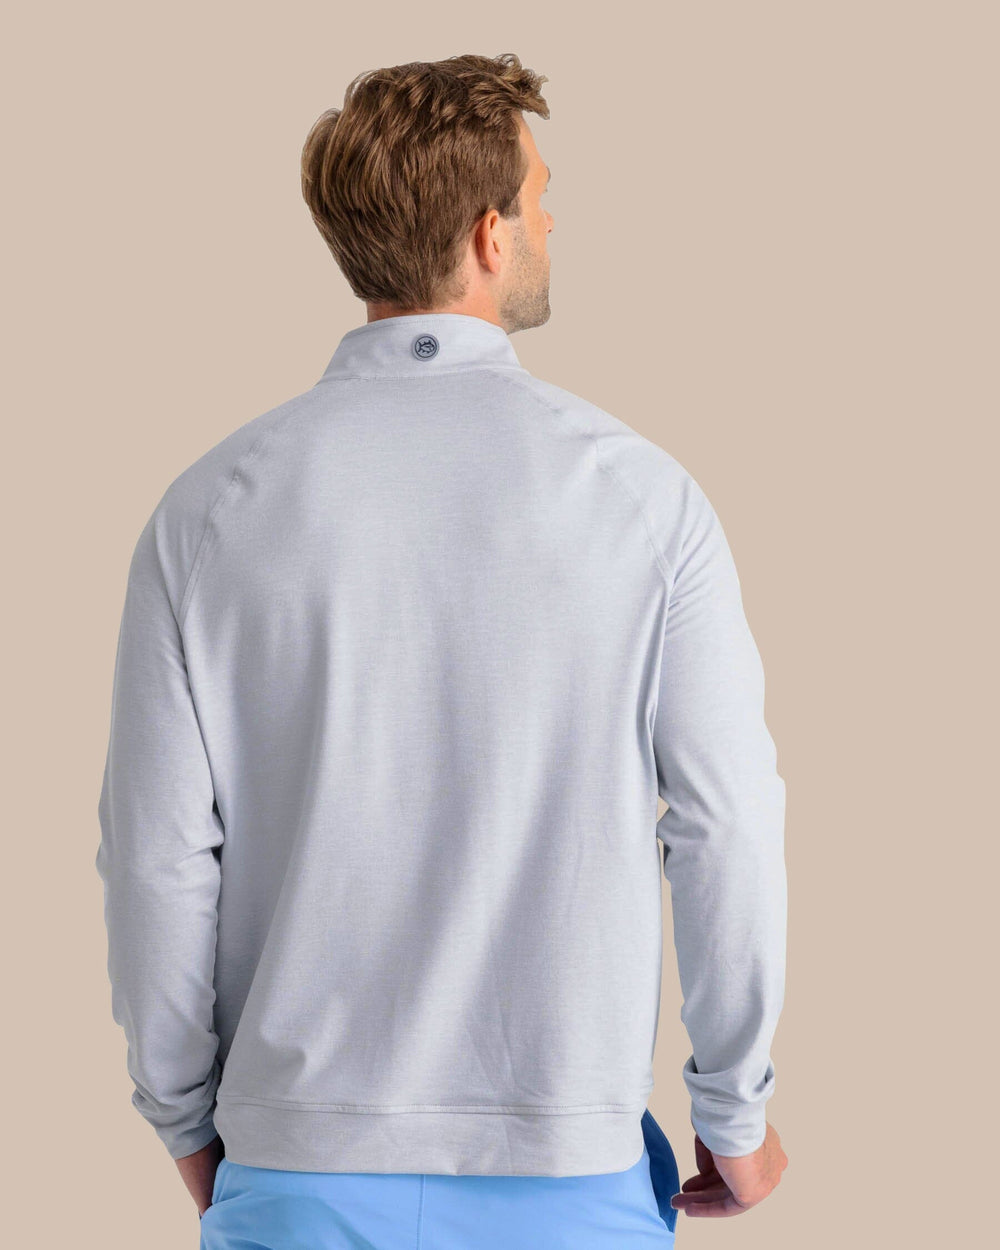 The back view of the Southern Tide Cruiser Heather Quarter Zip by Southern Tide - Heather Slate Grey